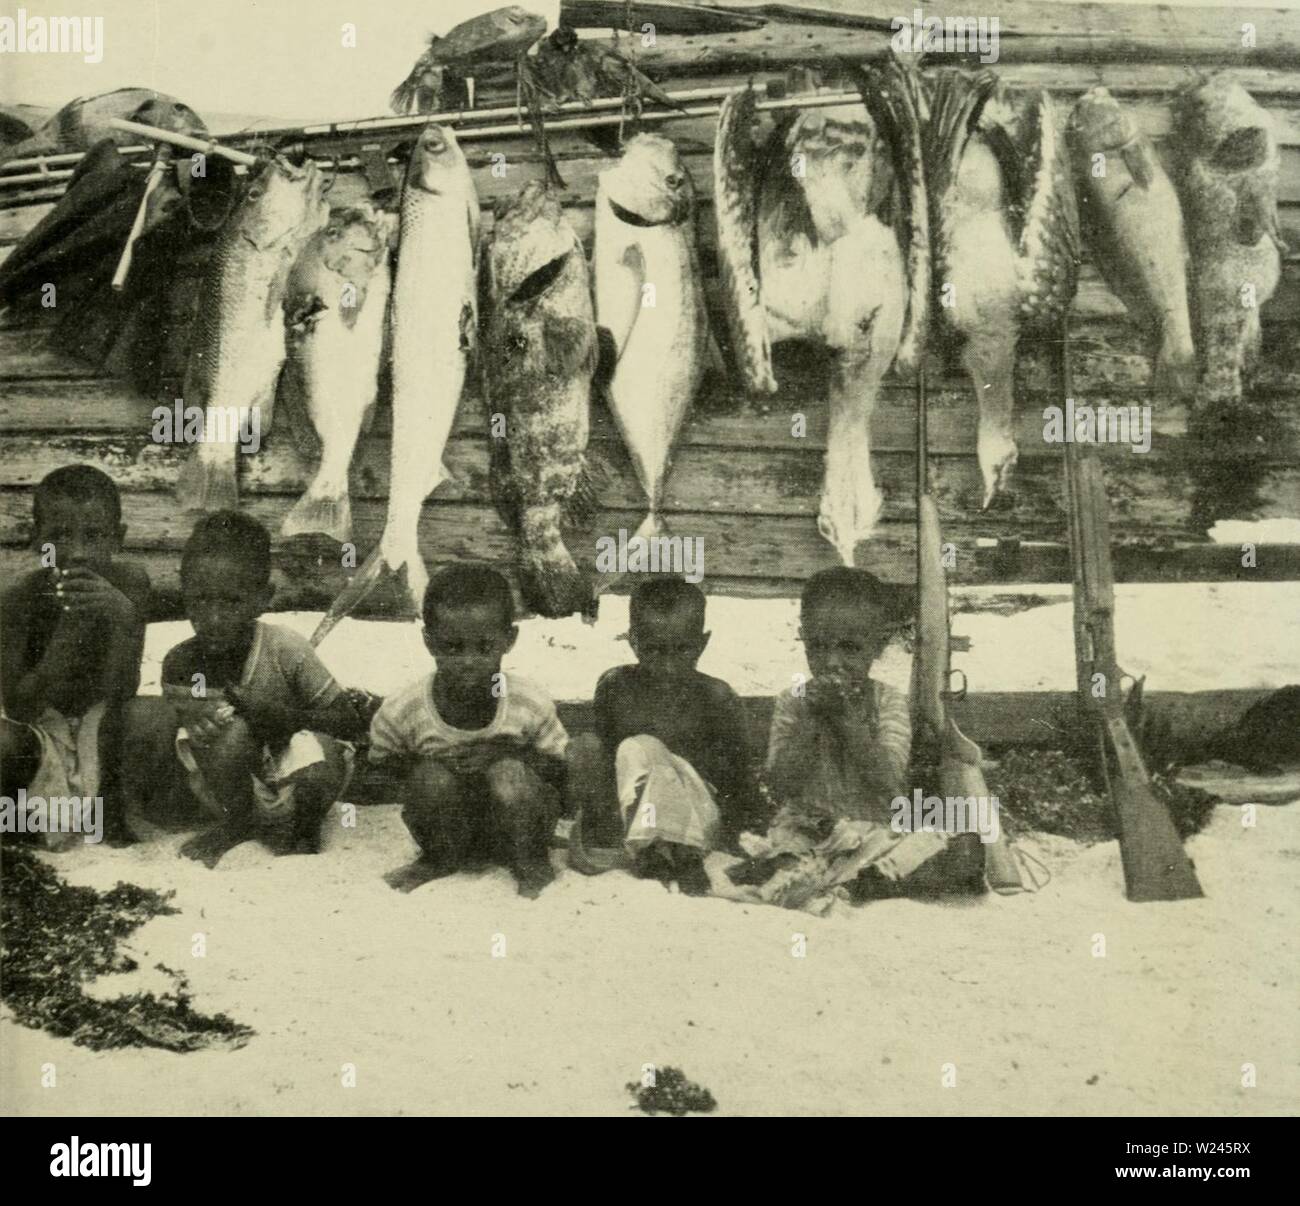 Archive image from page 208 of Dahlak with the Italian National. Dahlak: with the Italian National Underwater Expedition in the Red Sea  dahlakwithitalia00rogh Year: 1957  26. A day's catch at Dissei. The third fish from the left is a 'cefalone this is followed by a grouper, a tunny fish, two Arabian bustard, a fish belonging to the family of Phectorhynchidae (the second fish in the row belongs to the same family), and a grouper; the first fish in the row is a bream. Above the 'cefalone's' muzzle is a box fish. 27. A rare, brightly coloured, coral fish. Stock Photo